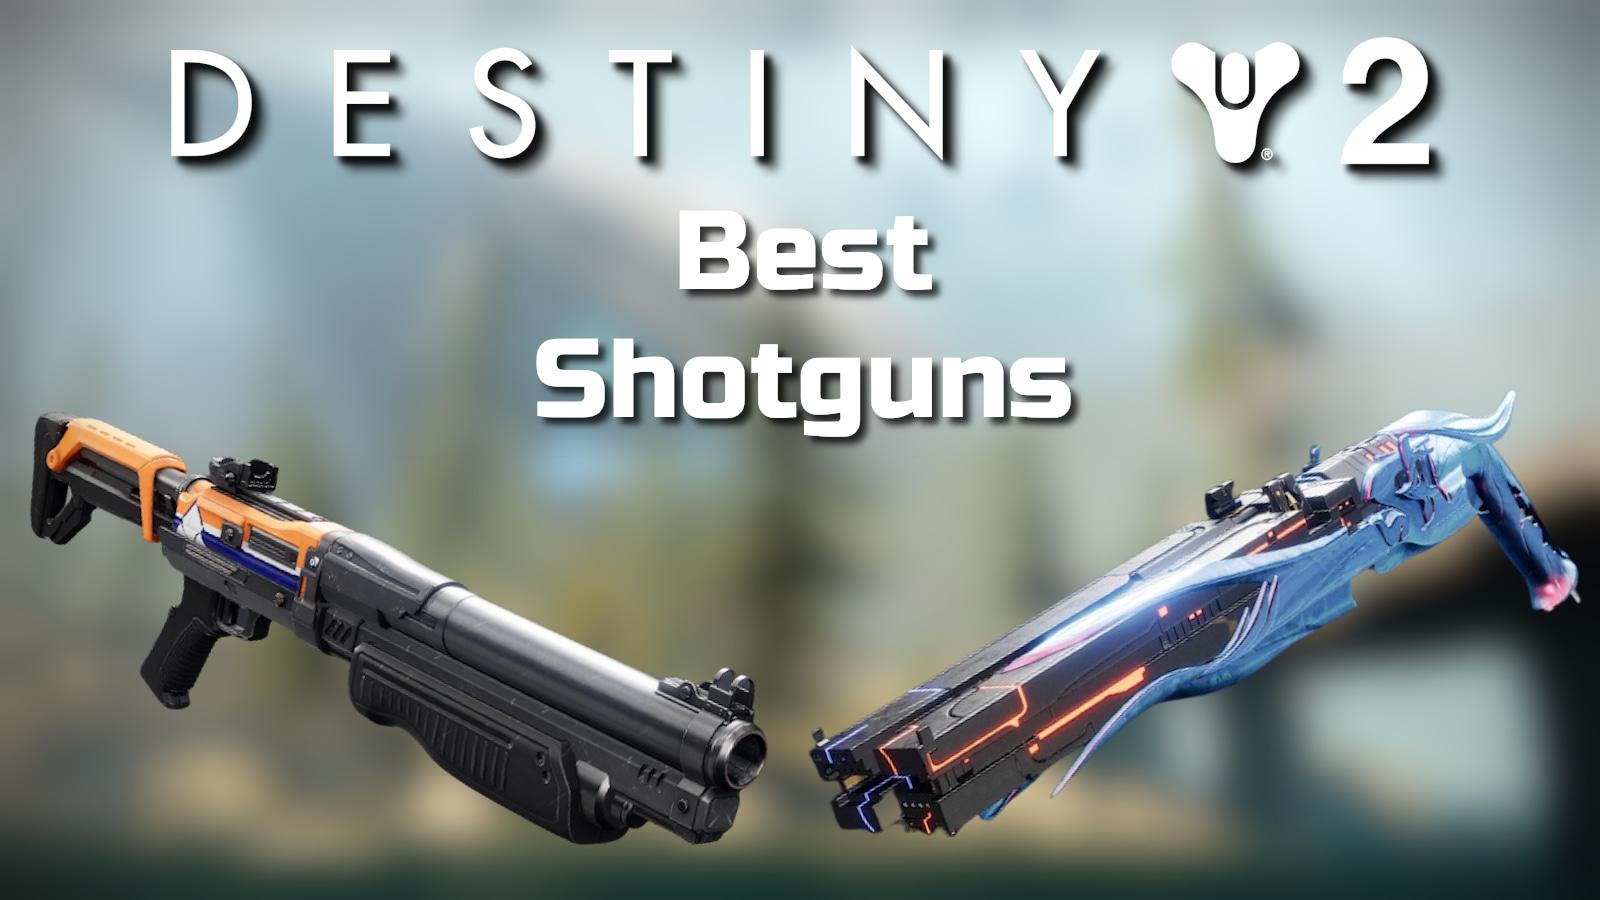 The best shotguns to use in Destiny 2 for PvE and PvP.